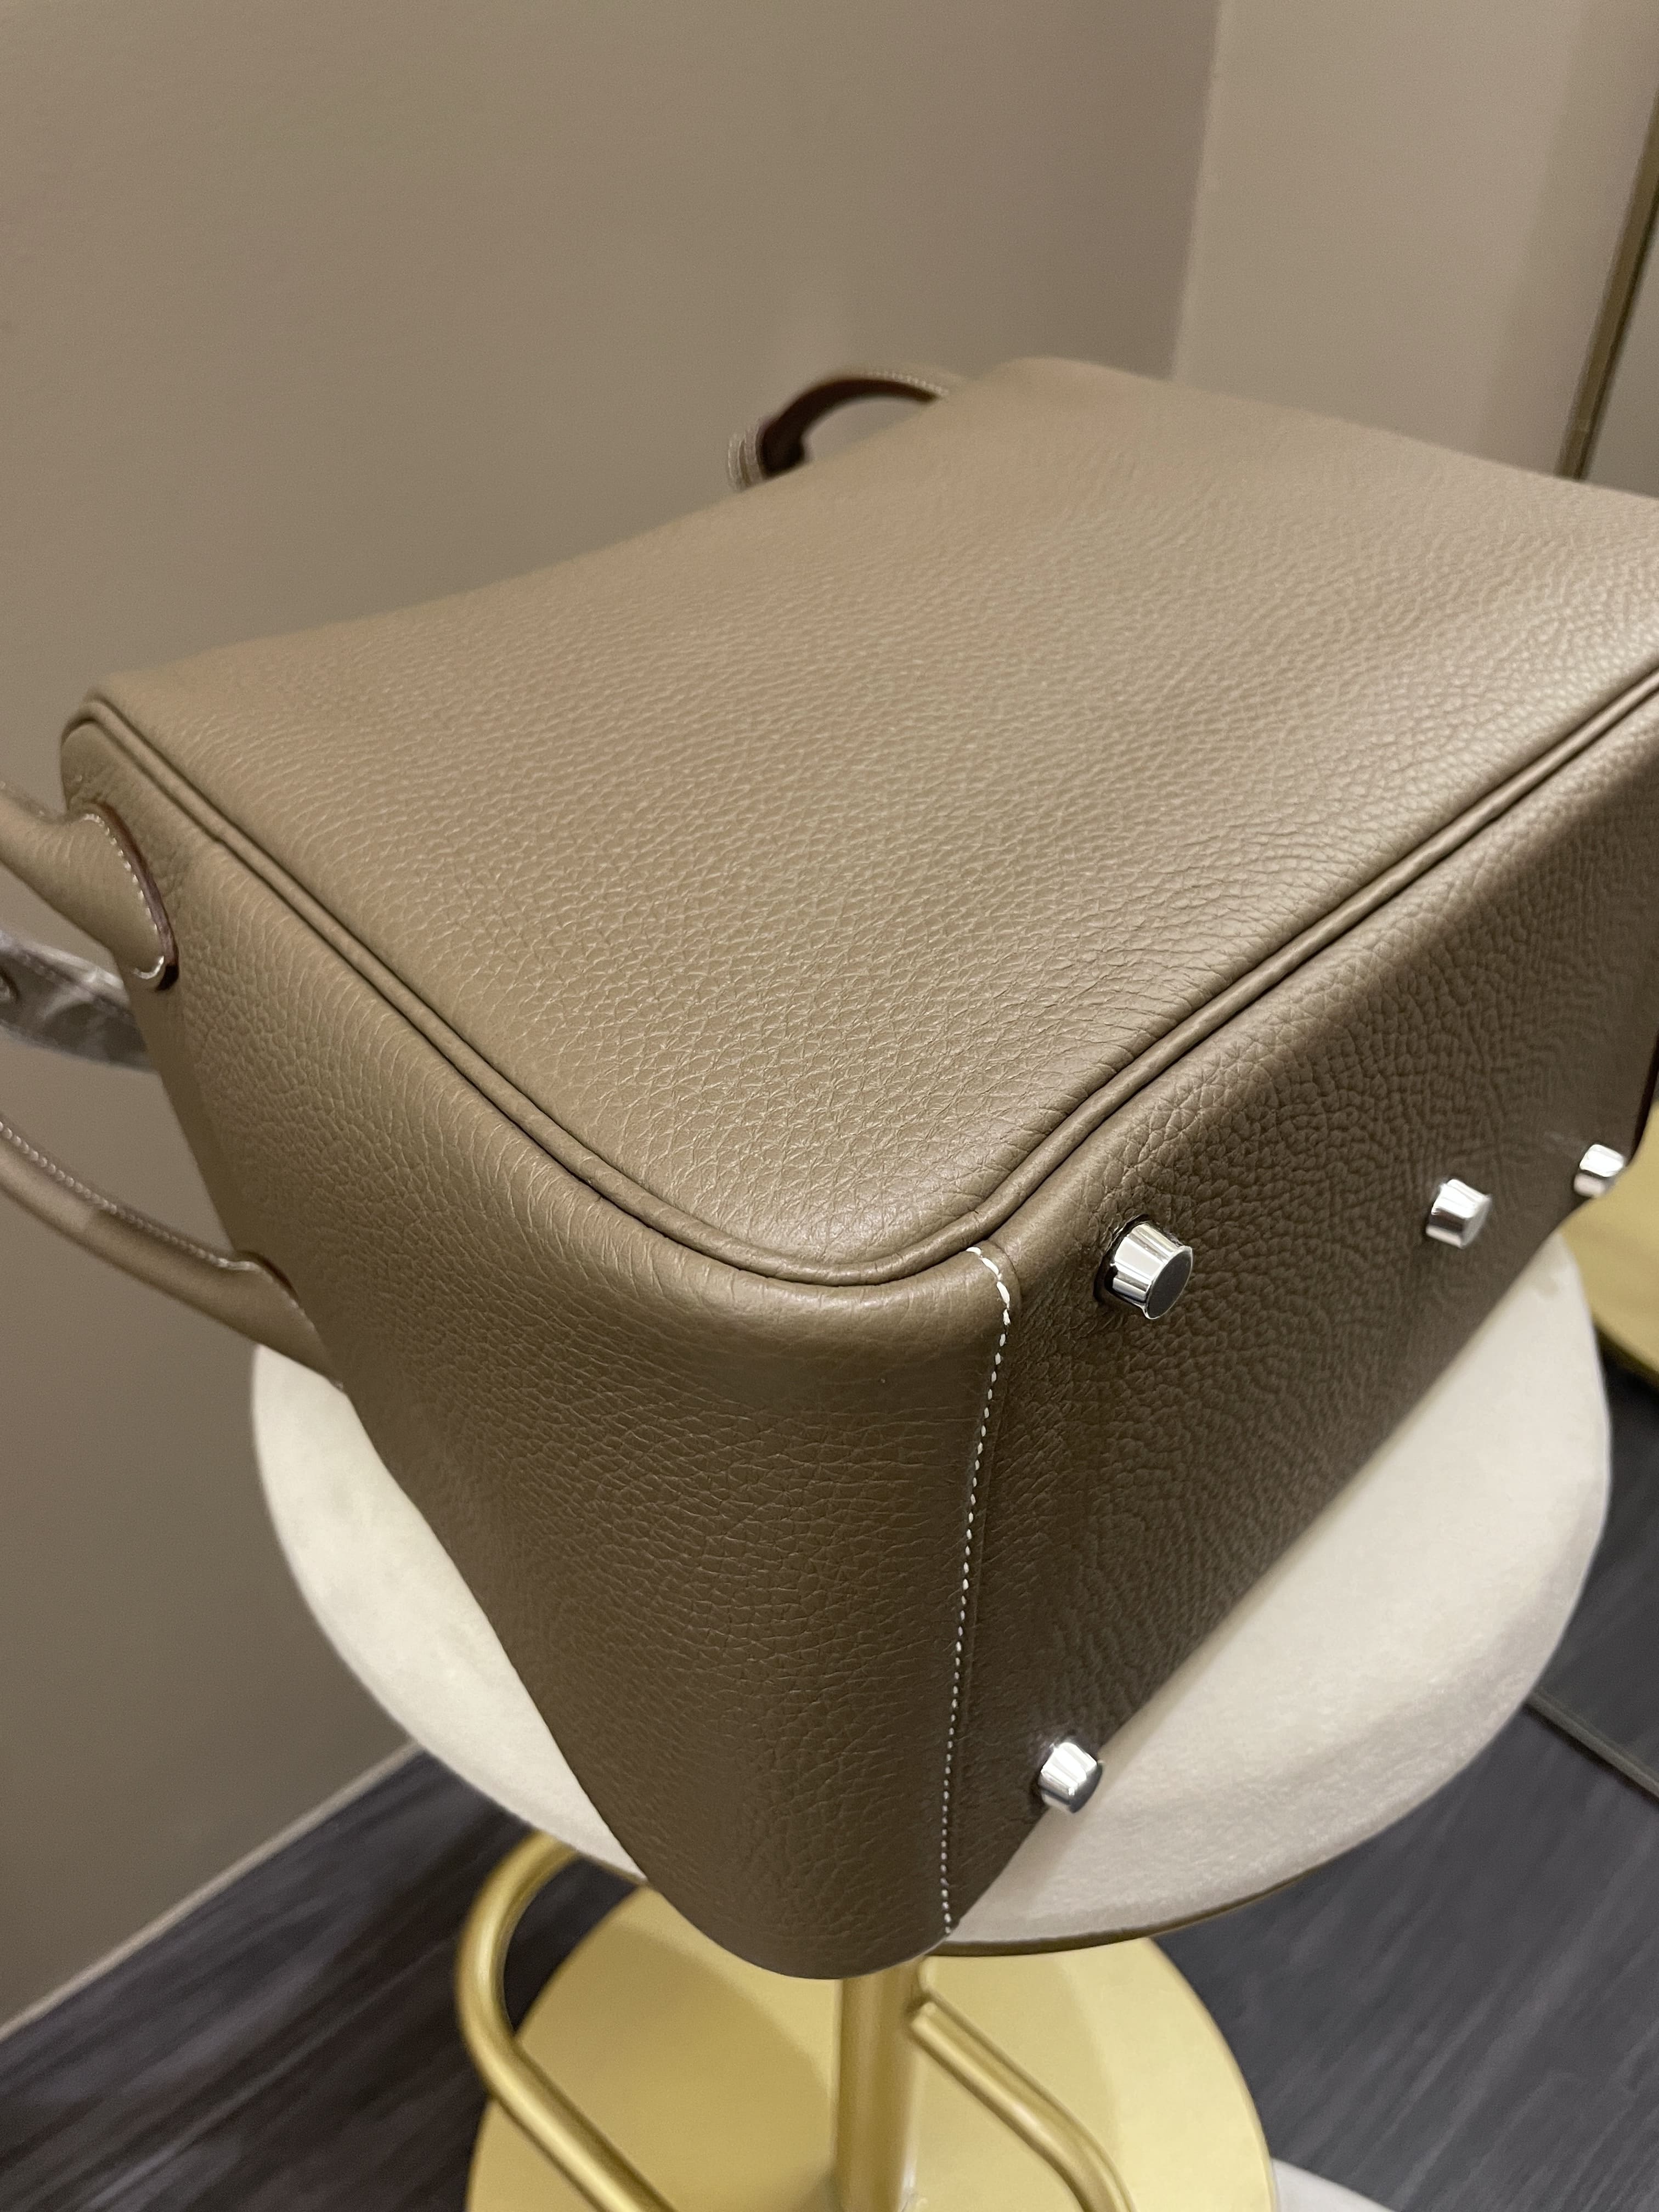 Hermes Lindy 30 Etoupe Review 